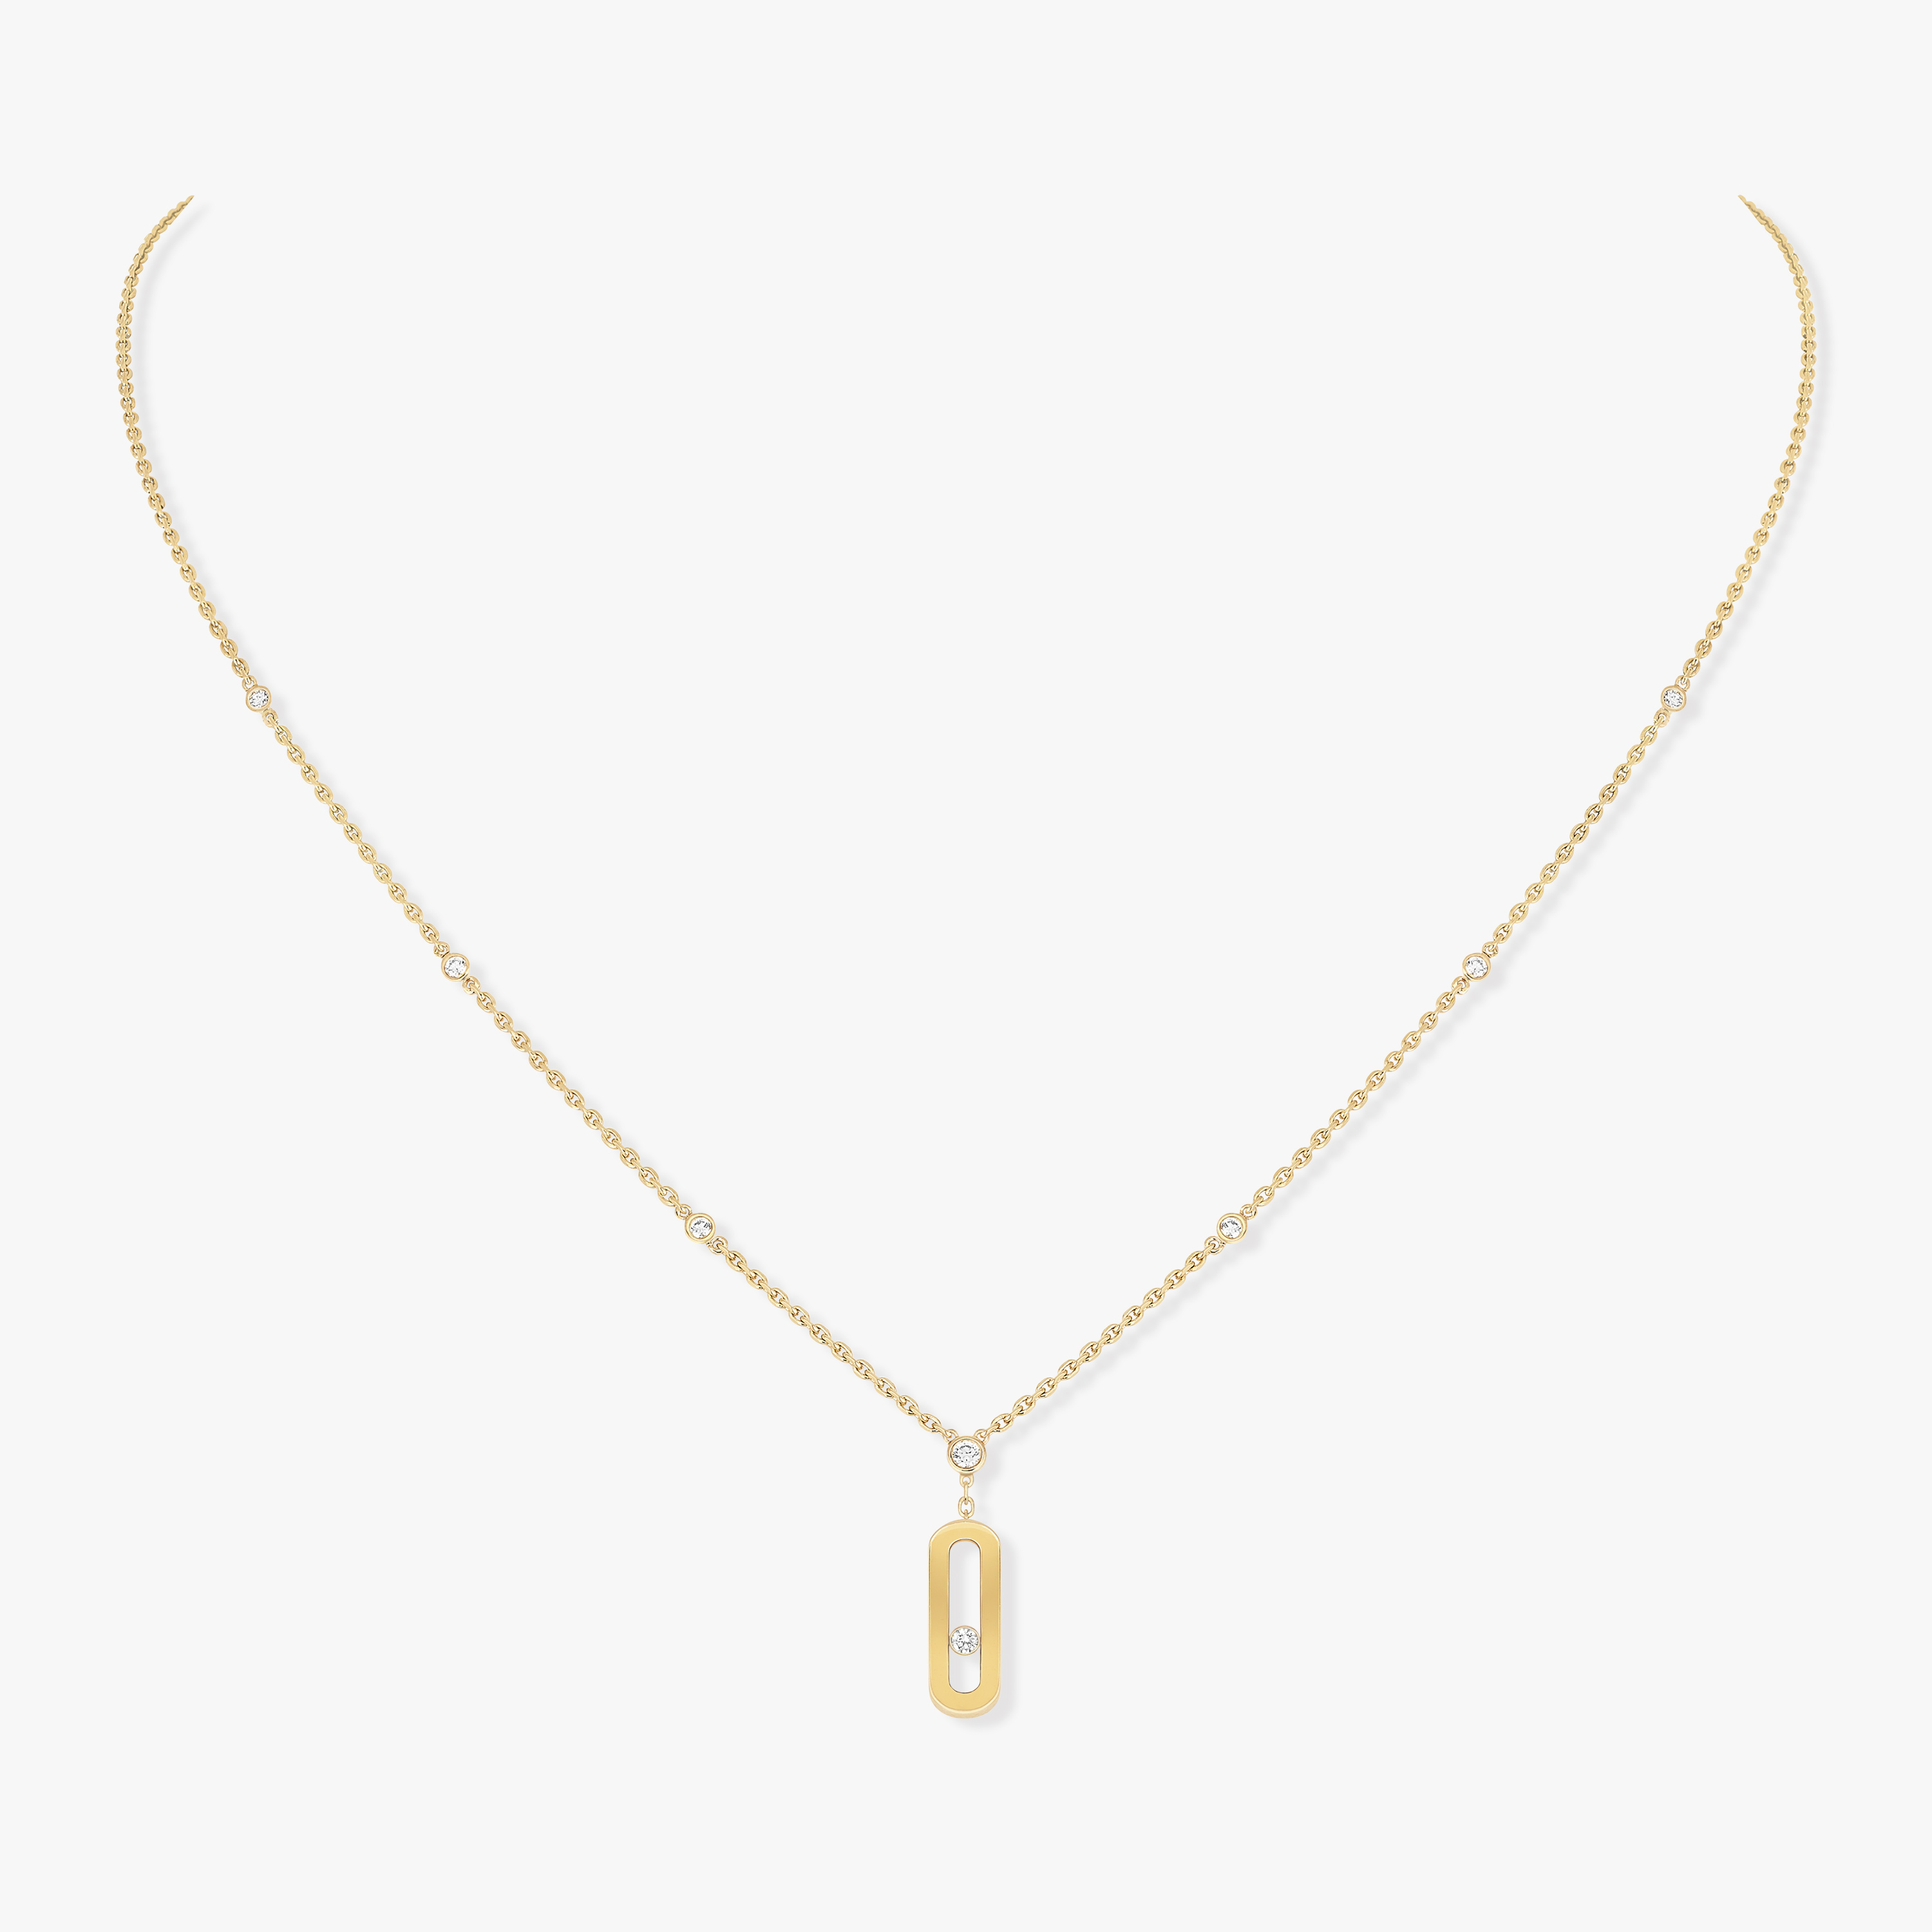 Long Move Uno Yellow Gold For Her Diamond Necklace 10111-YG